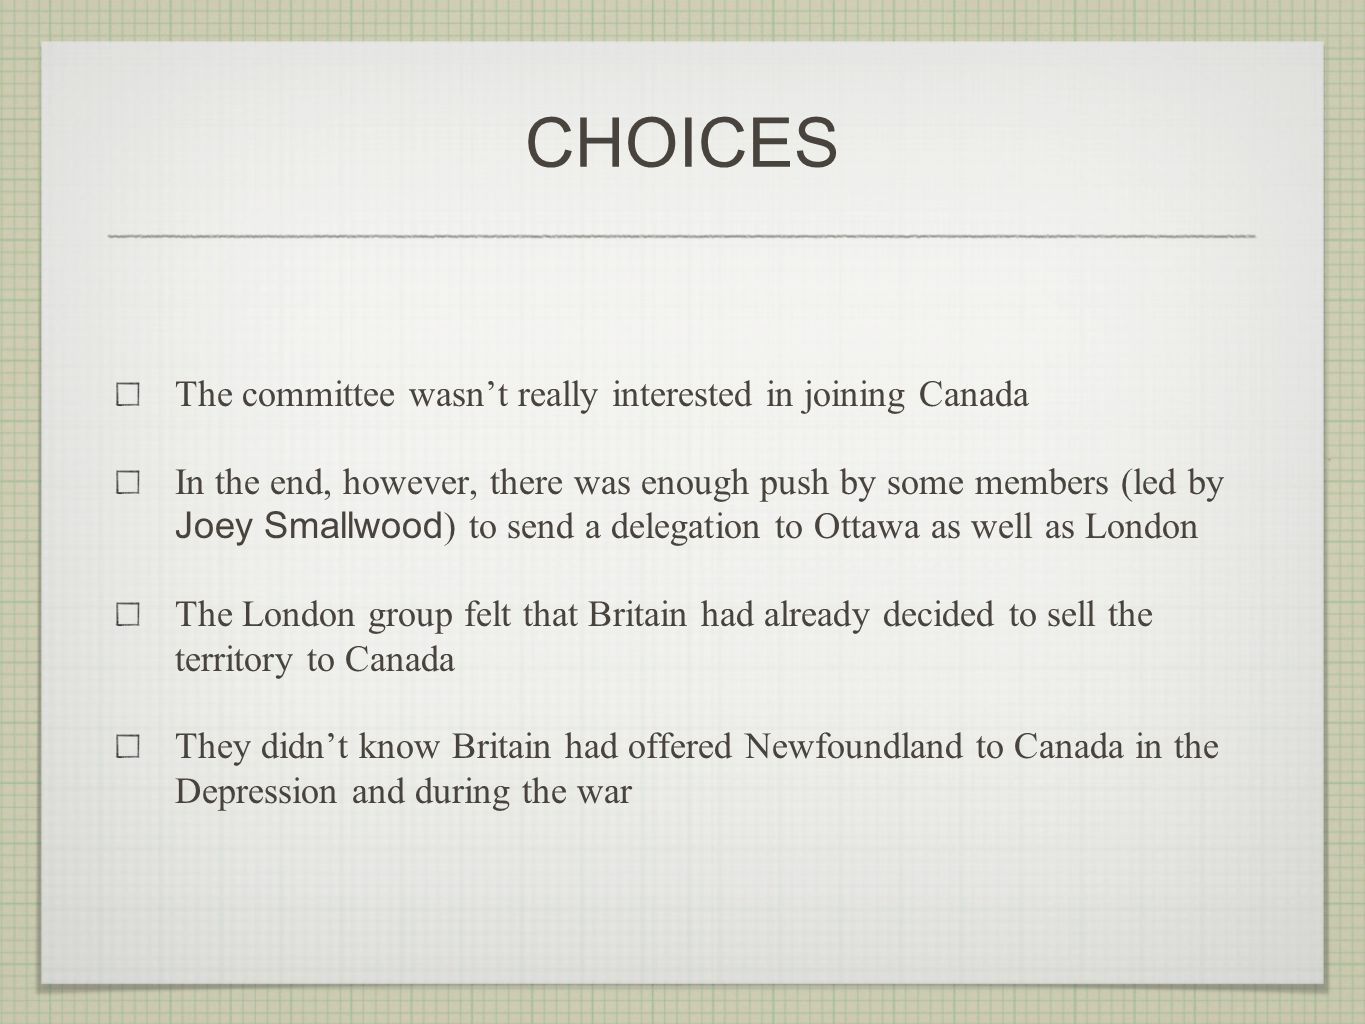 CHOICES The committee wasn’t really interested in joining Canada In the end, however, there was enough push by some members (led by Joey Smallwood ) to send a delegation to Ottawa as well as London The London group felt that Britain had already decided to sell the territory to Canada They didn’t know Britain had offered Newfoundland to Canada in the Depression and during the war